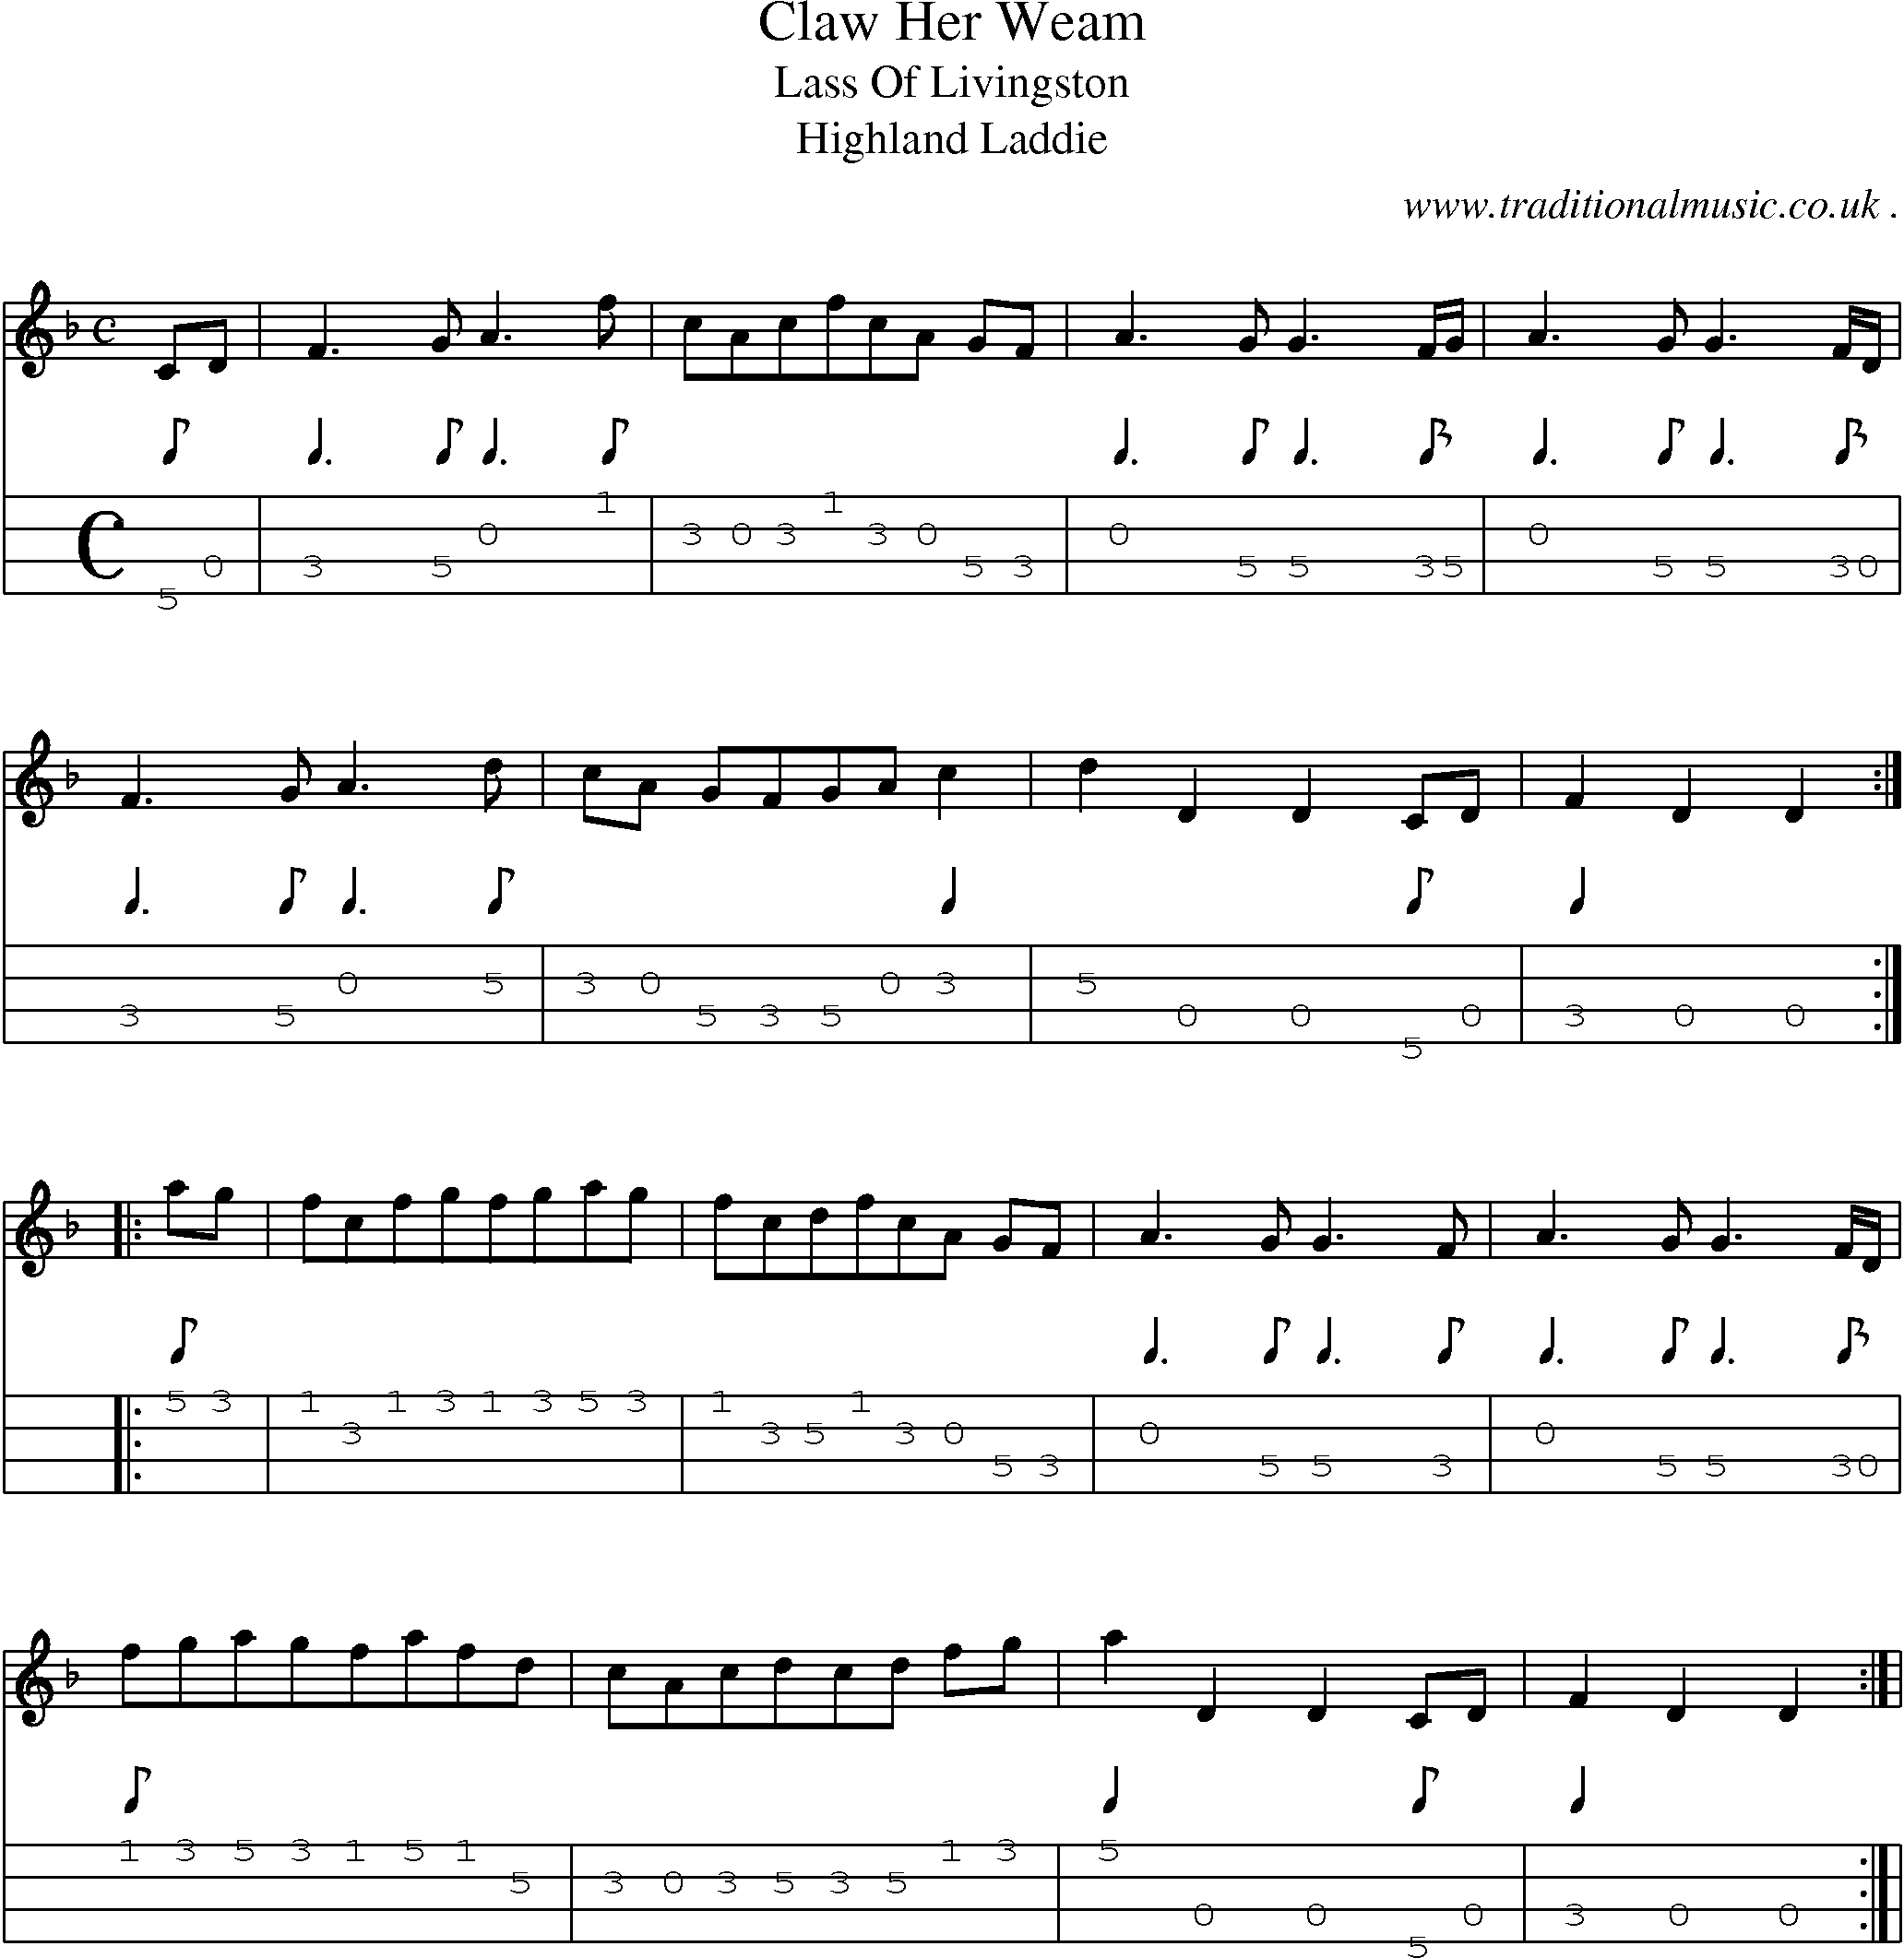 Sheet-Music and Mandolin Tabs for Claw Her Weam